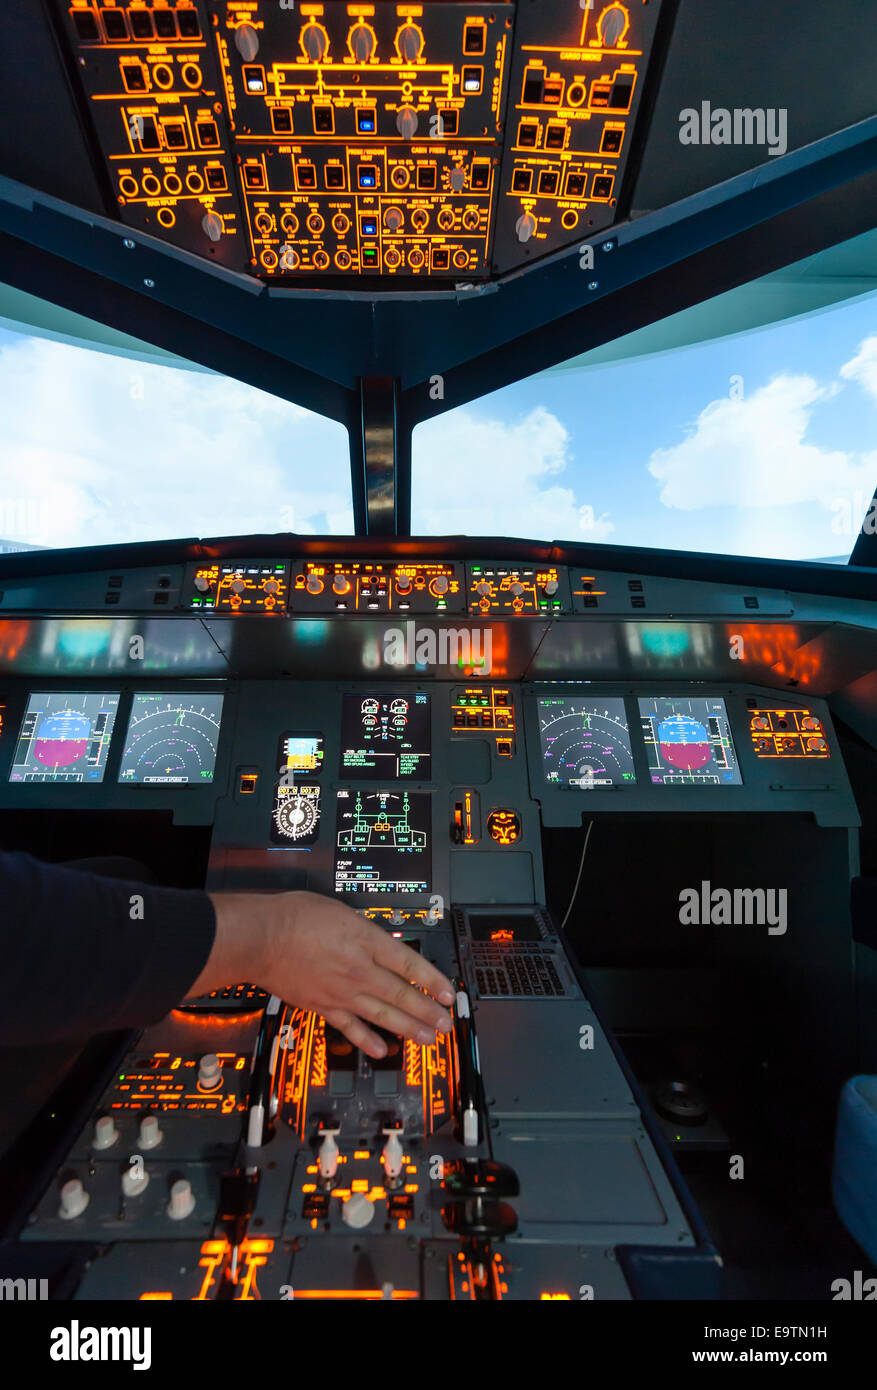 Cockpit of an Airbus A320 flight simulator that is used for training of professional airline pilots. Stock Photo